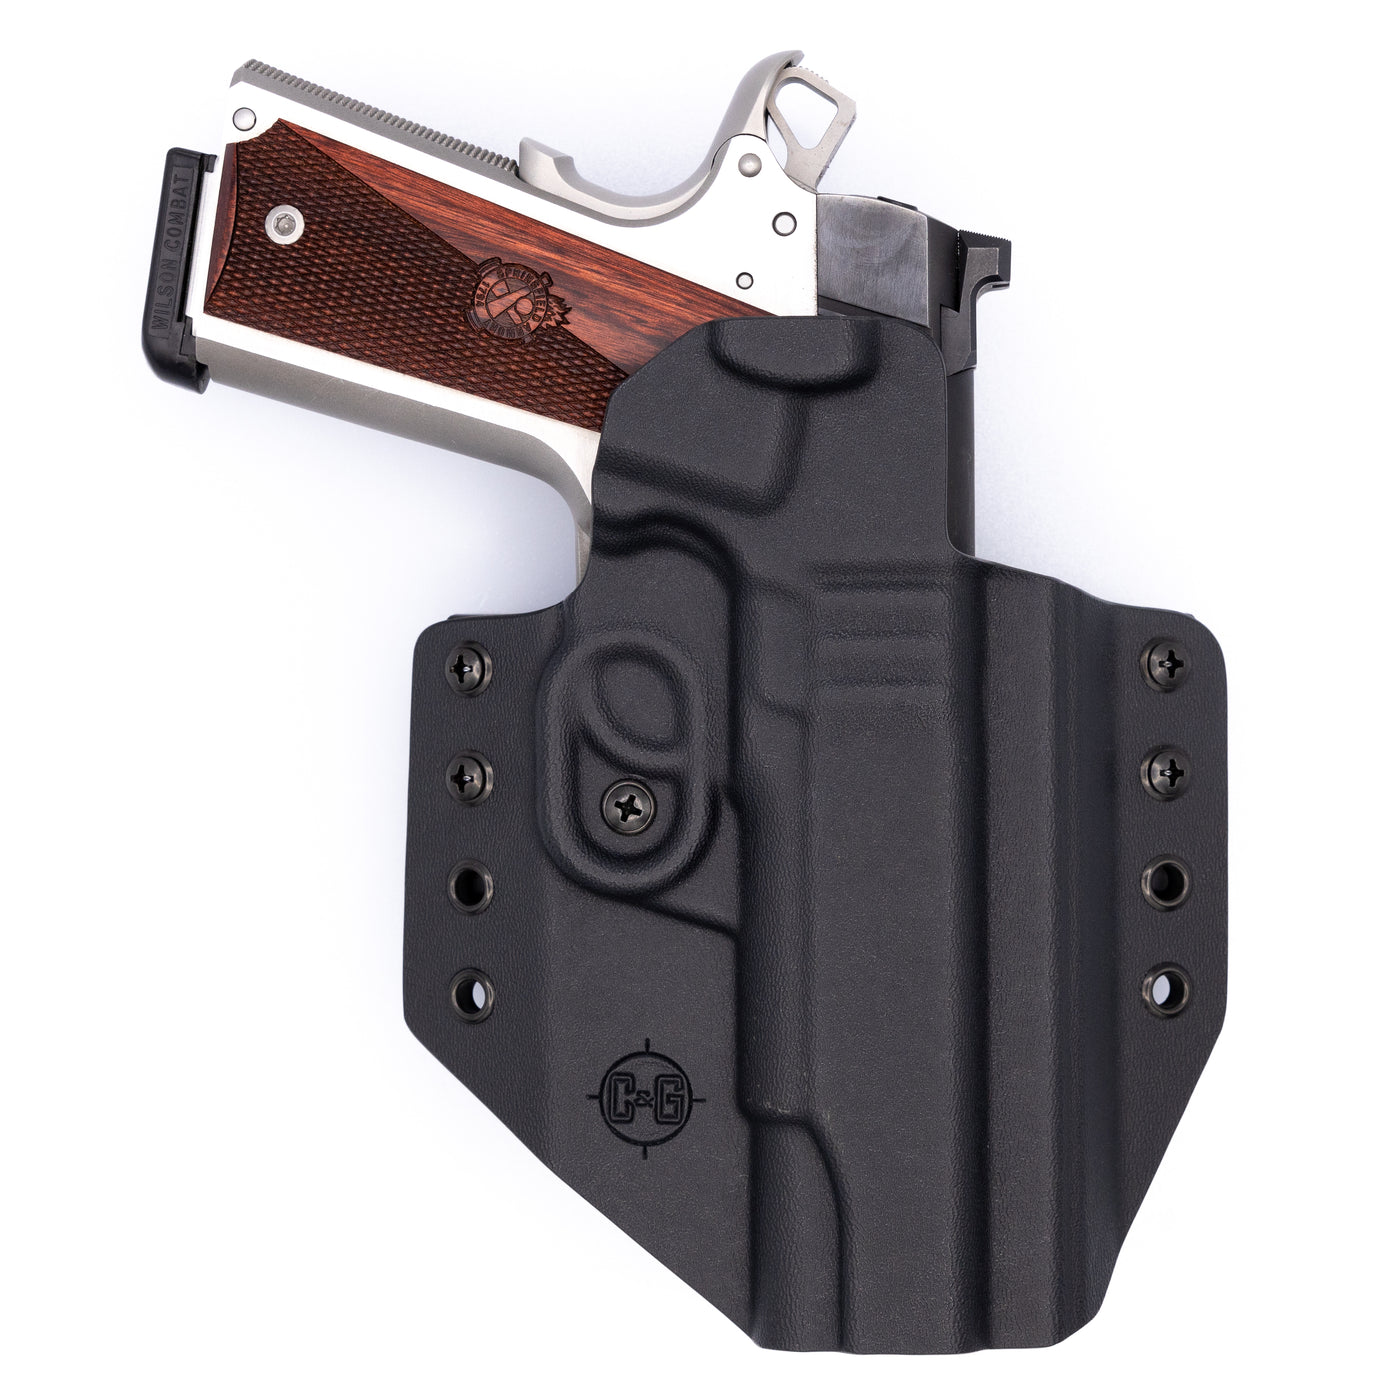 This is the C&G Holsters custom Covert OWB kydex holster for 1911 5in (Govt) made by STI in black